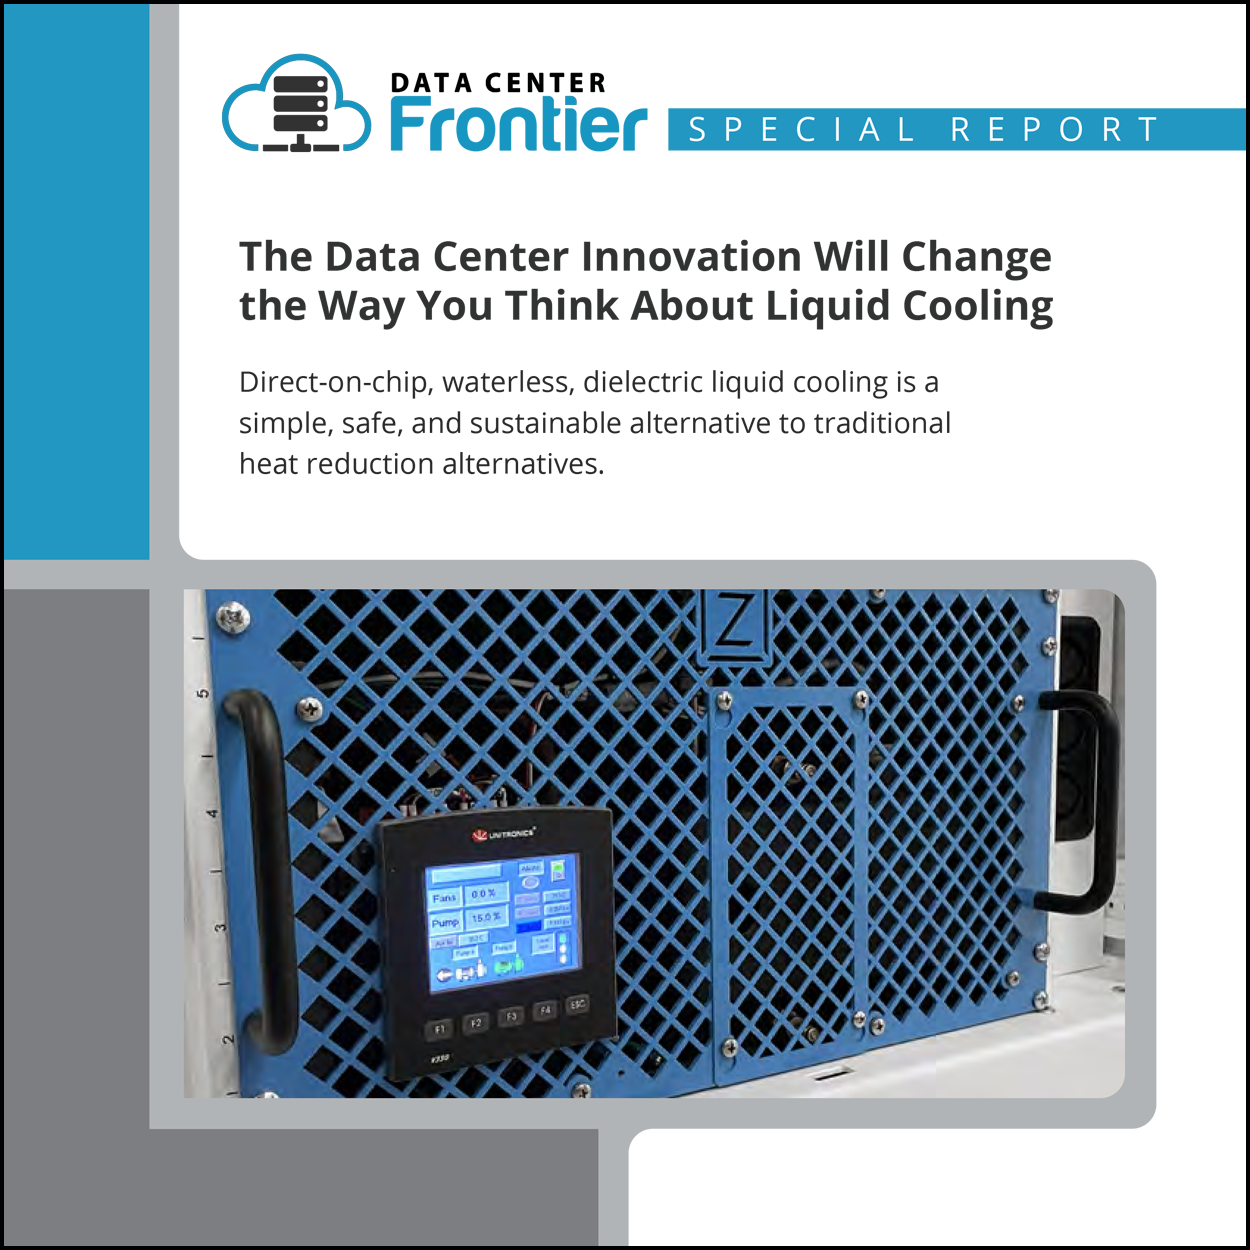 The Data Center Innovation Will Change the Way You Think About Liquid Cooling Image